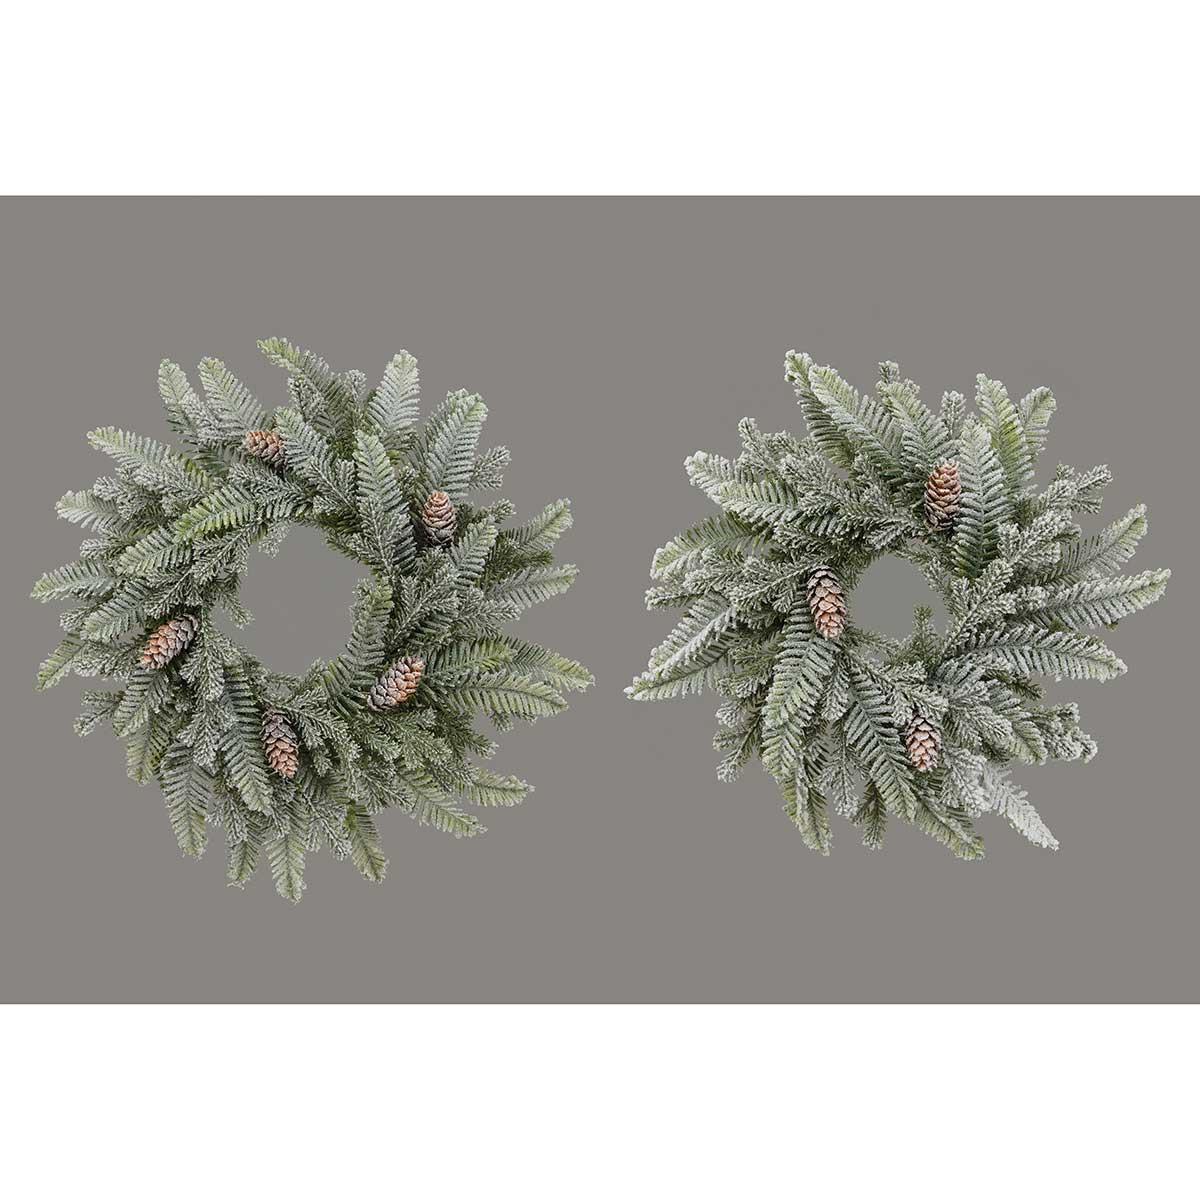 WREATH HEMLOCK PINE 16IN (INNER RING 5.5IN) GREEN - Click Image to Close